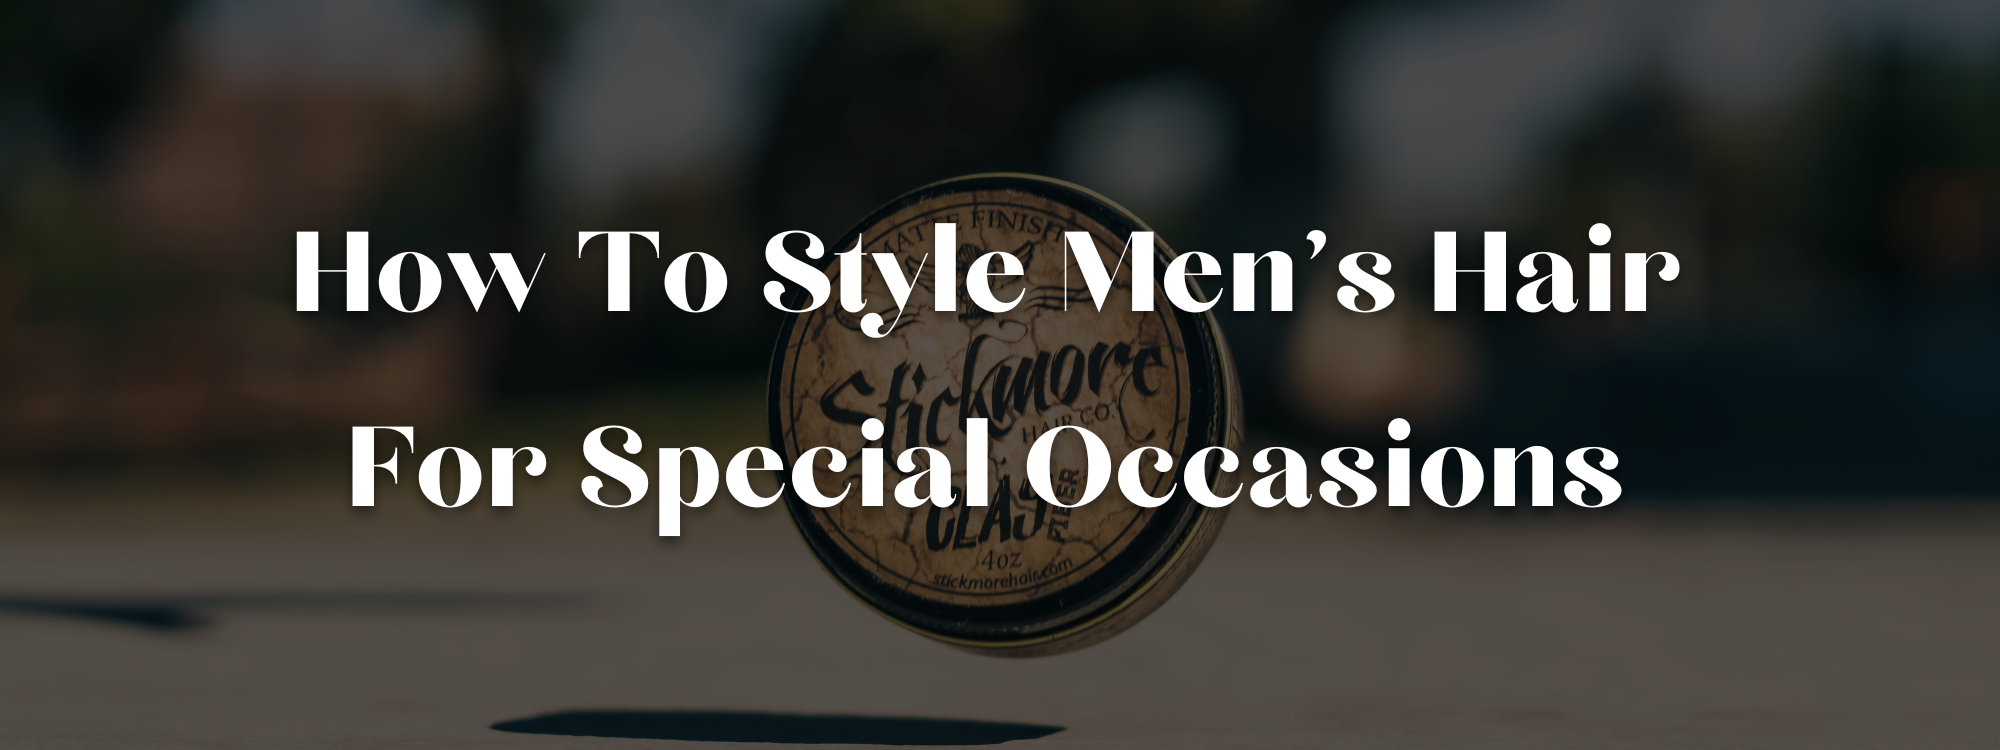 How to style men's hair for special occasions - stickmore hair - pomade, clay, wax, pompadour, combover, slick back